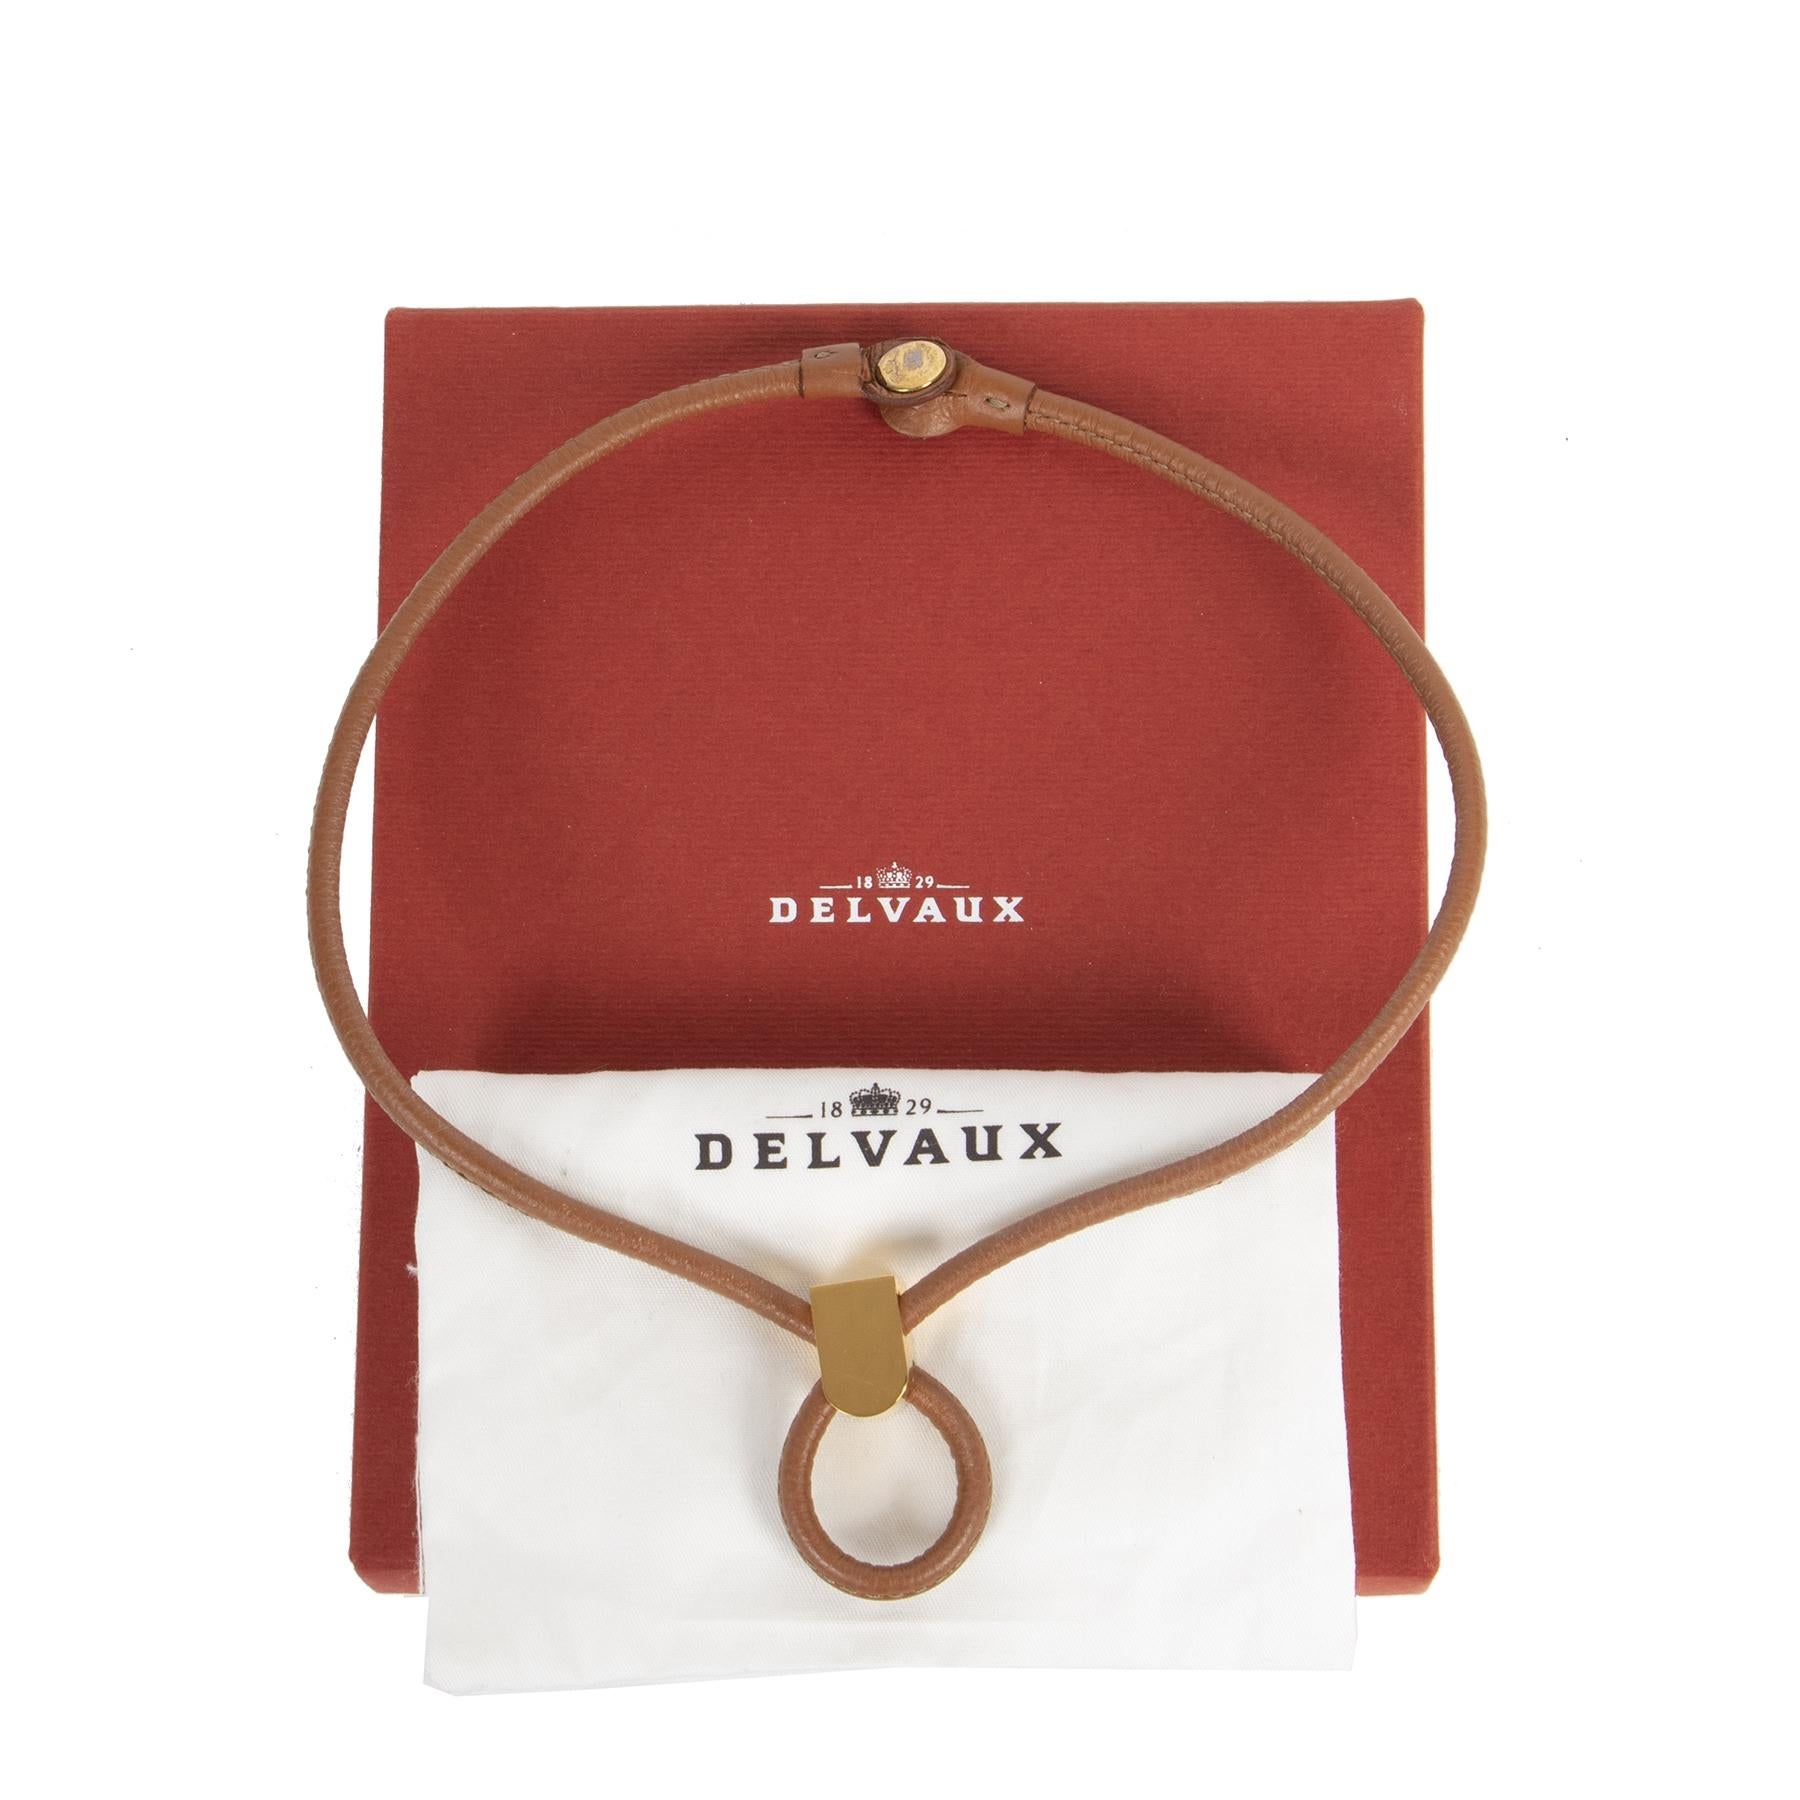 Very good preloved condition

Delvaux Cognac Leather Collar Necklace

This chic necklace by Delvaux is crafted of brown leather and features gold-tone slide ornament and peg-in-hole closure. Perfect for any occasion, whether it's for everyday wear